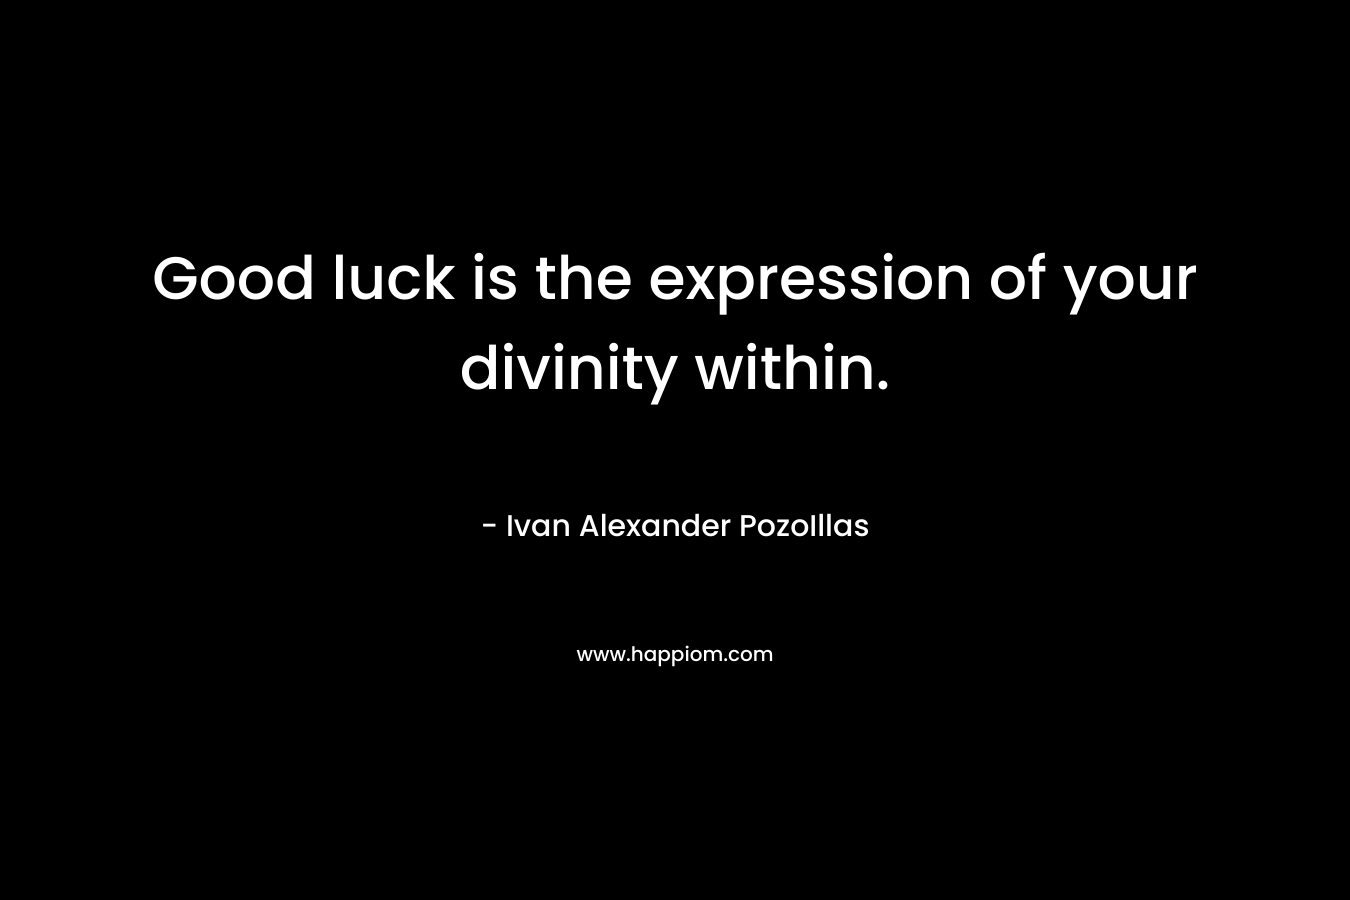 Good luck is the expression of your divinity within.